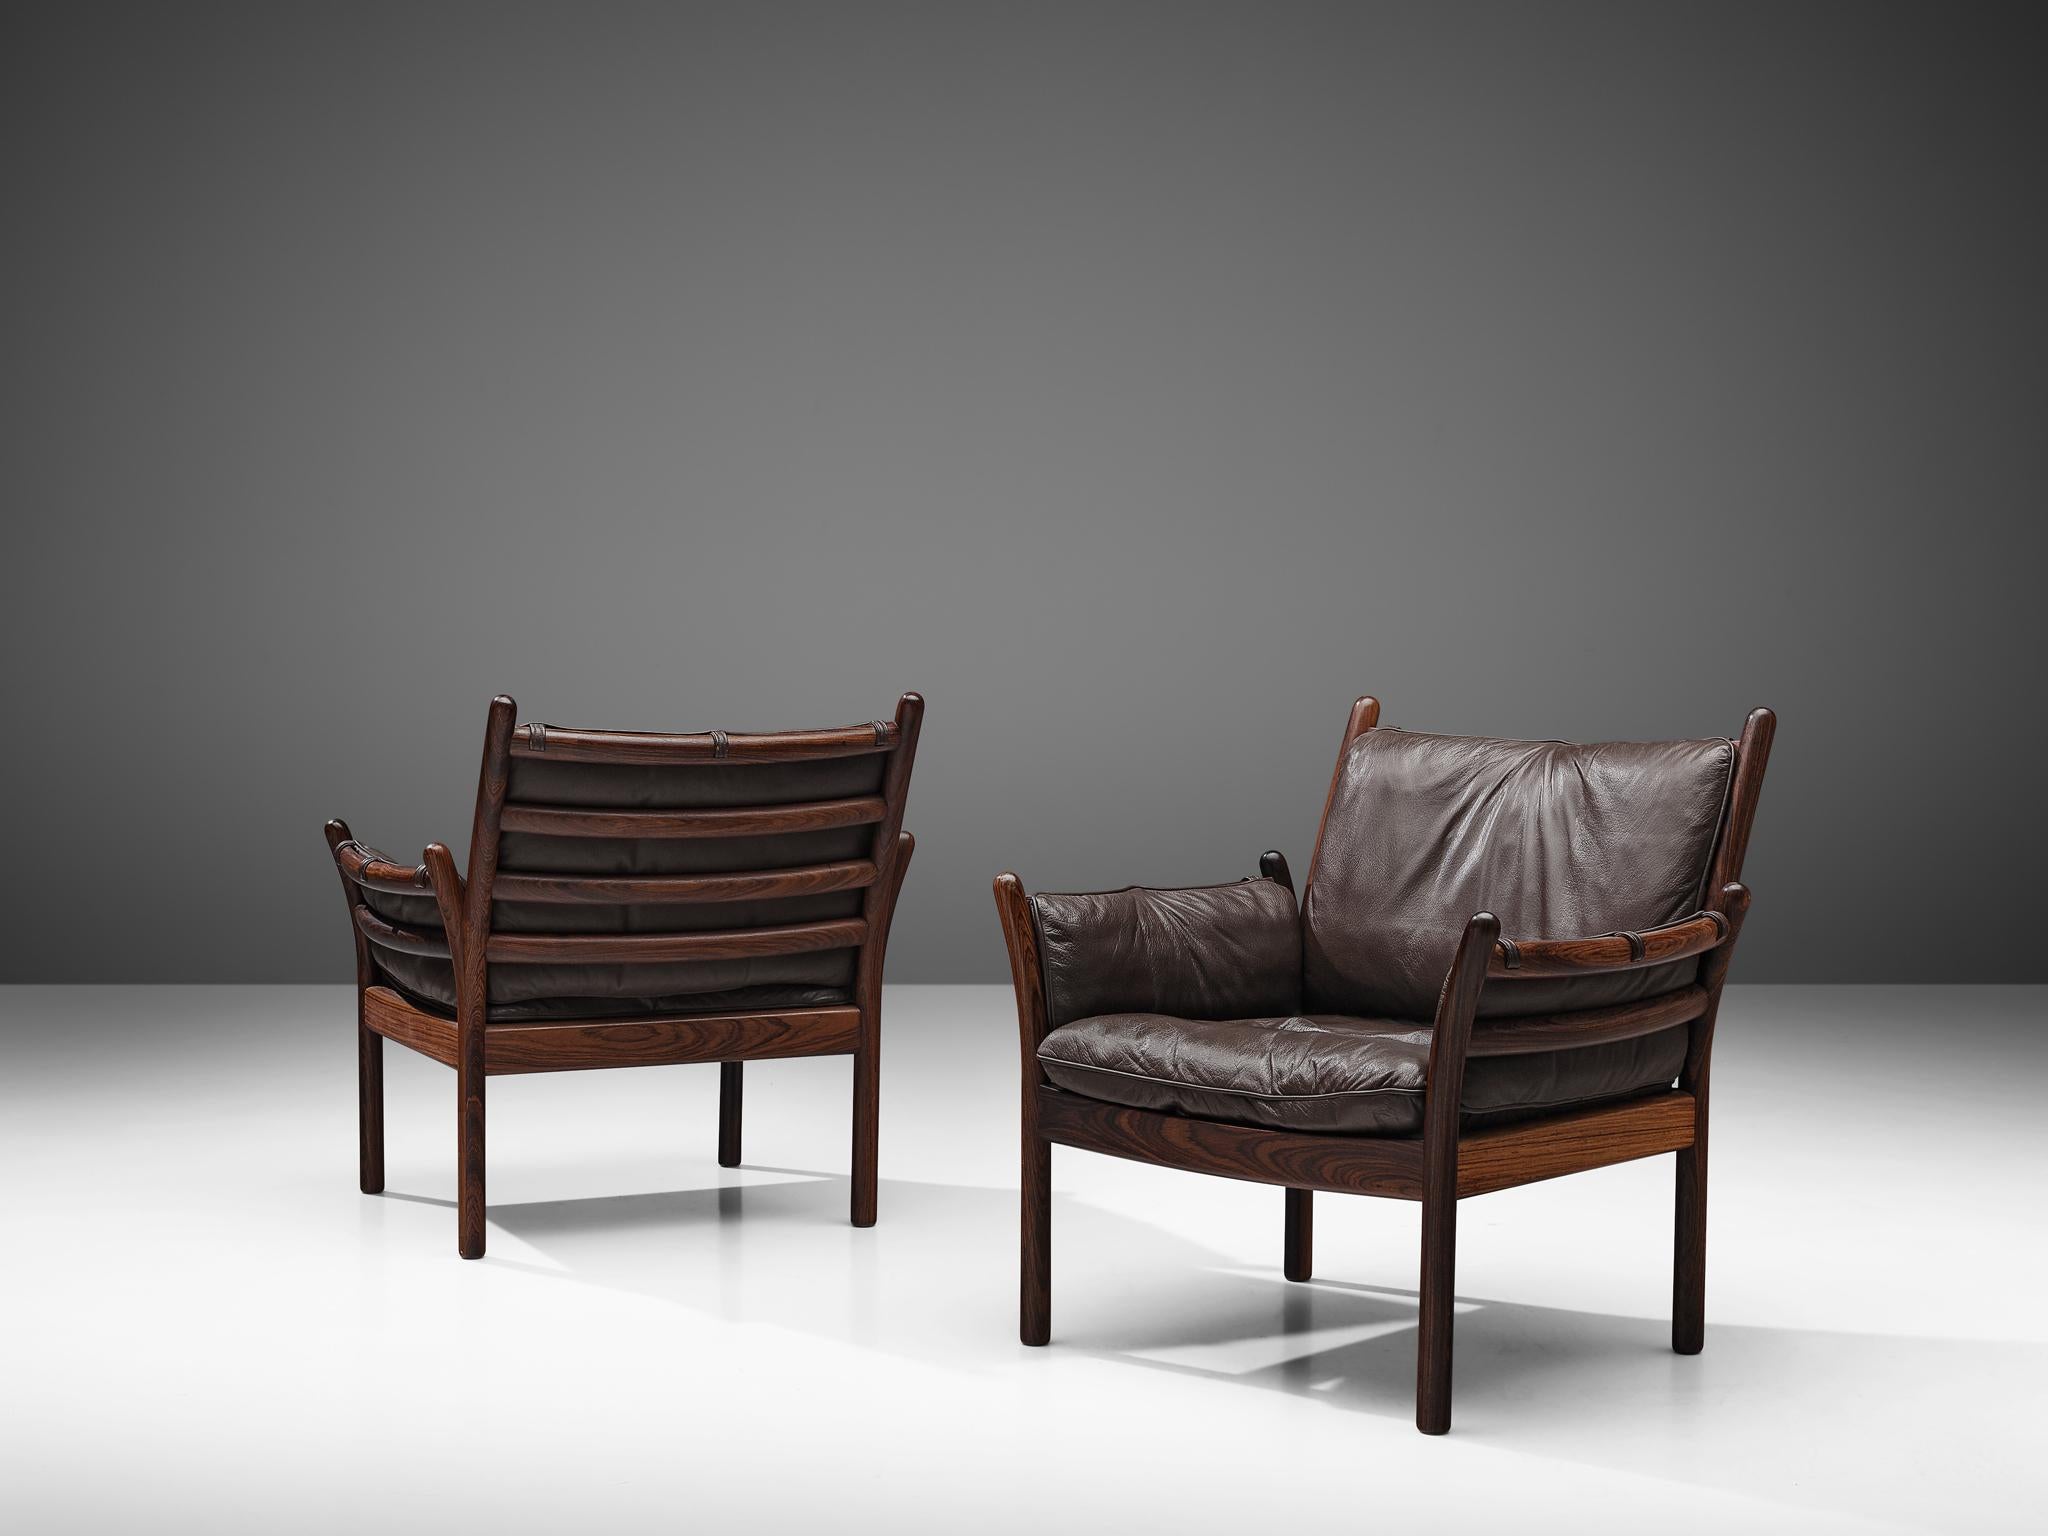 Illum Wikkelsø by CFC Silkeborg, two 'Genius' chairs, leather and rosewood, Denmark, 1950s.

This chair is made out of solid rosewood and features a cognac leather cushion on both seat and back. The chair is created as a sort of slatted rosewood